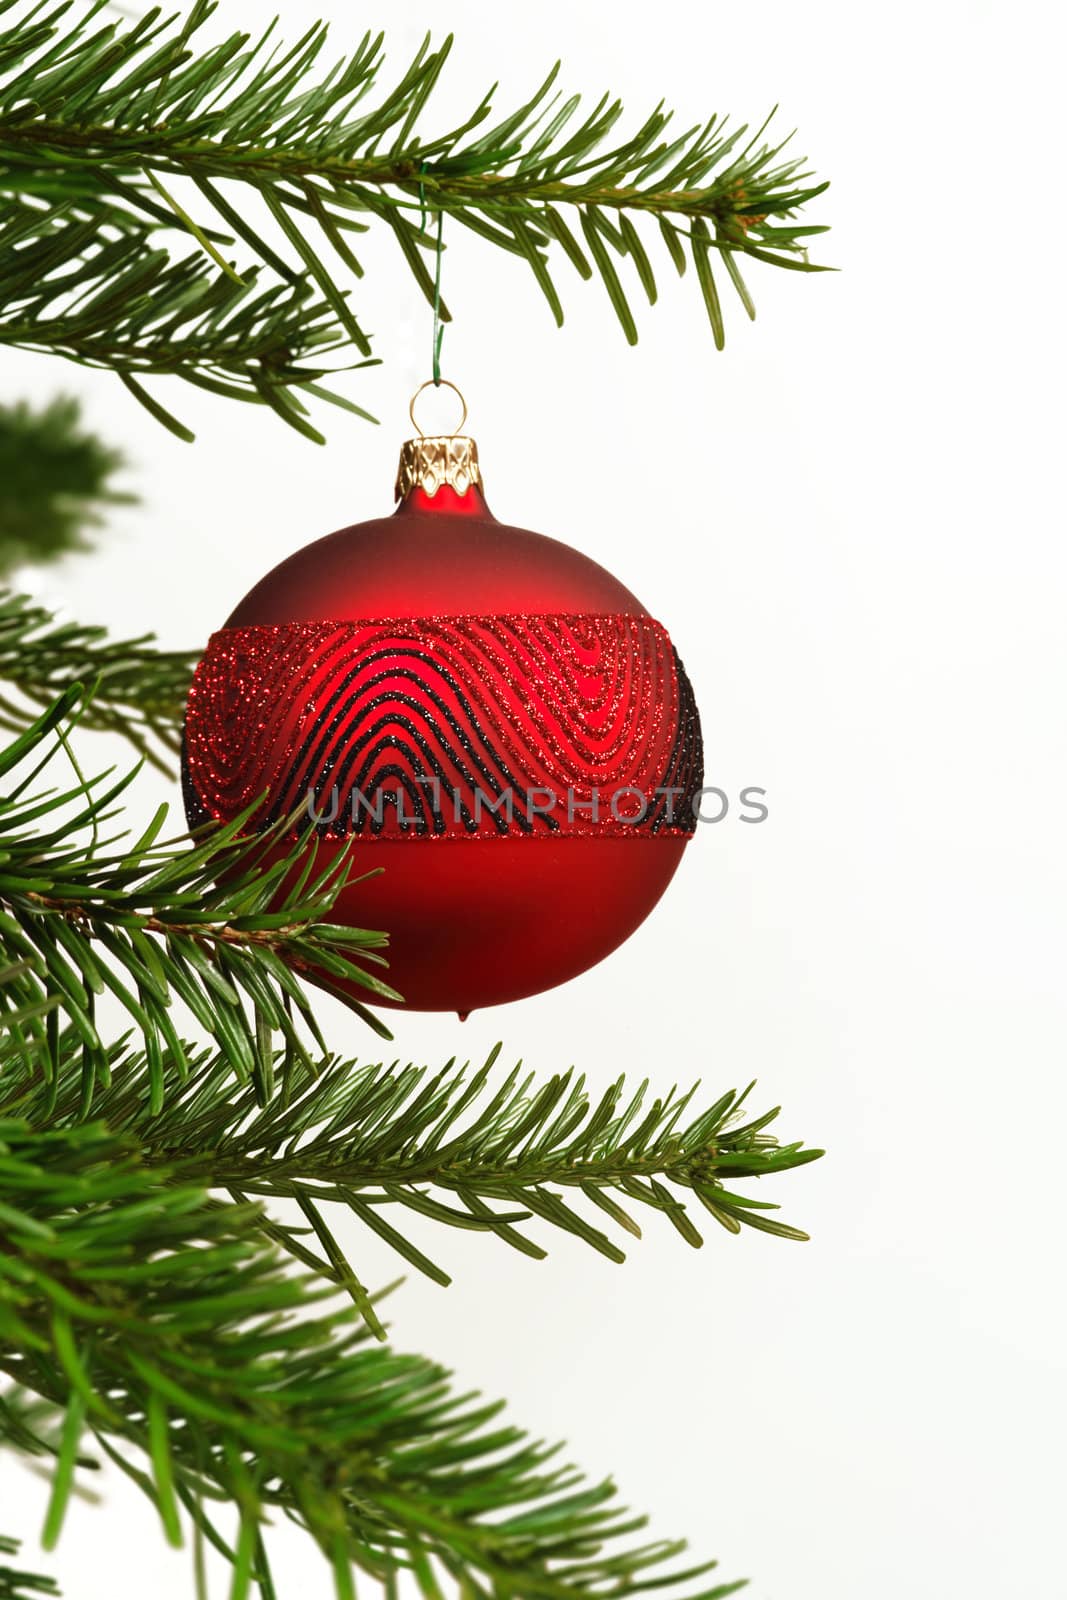 A single red Christmas ball hanging off a tree.
